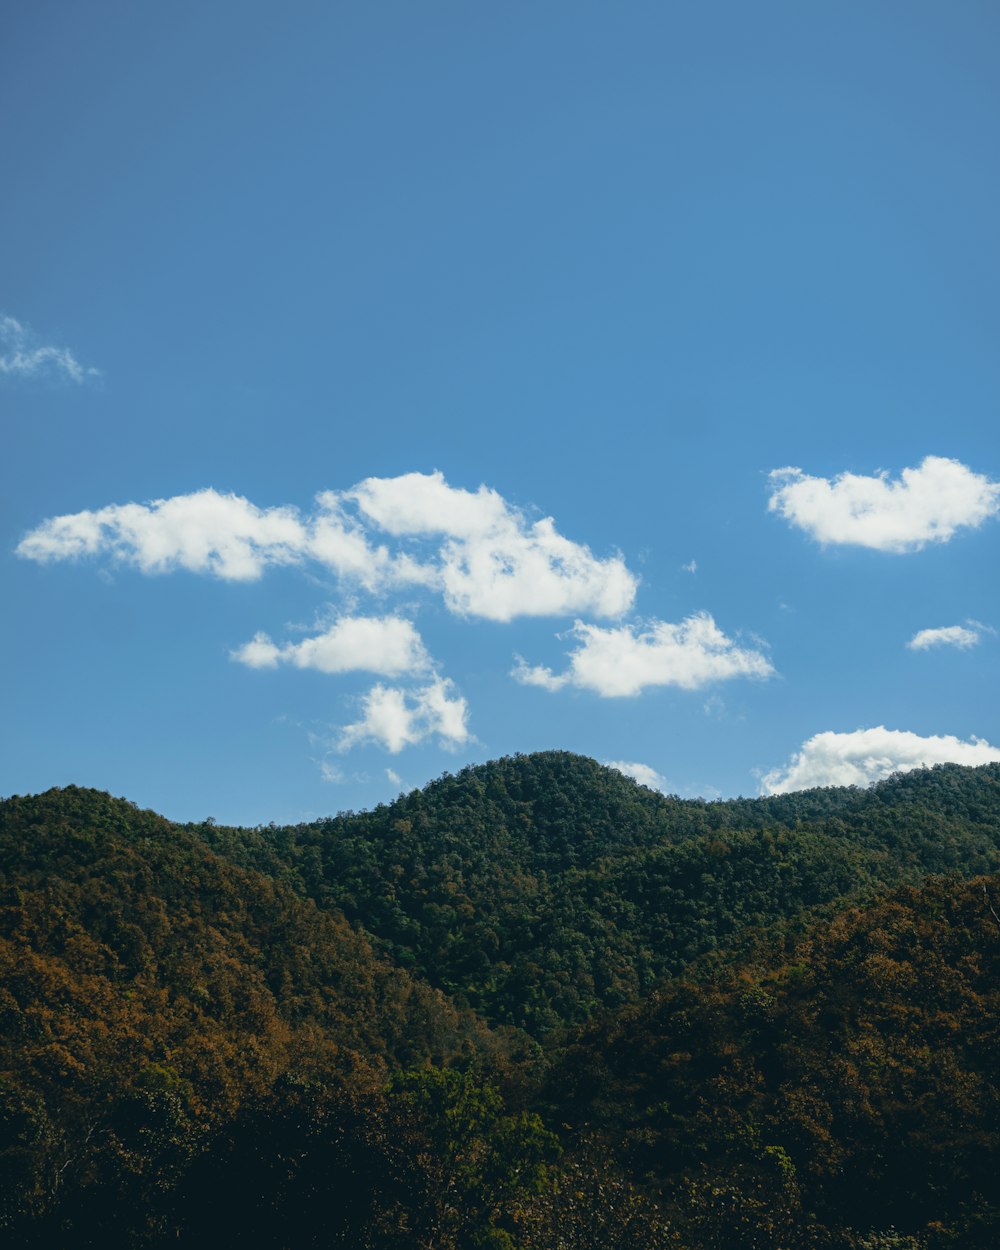 a landscape with trees and blue sky